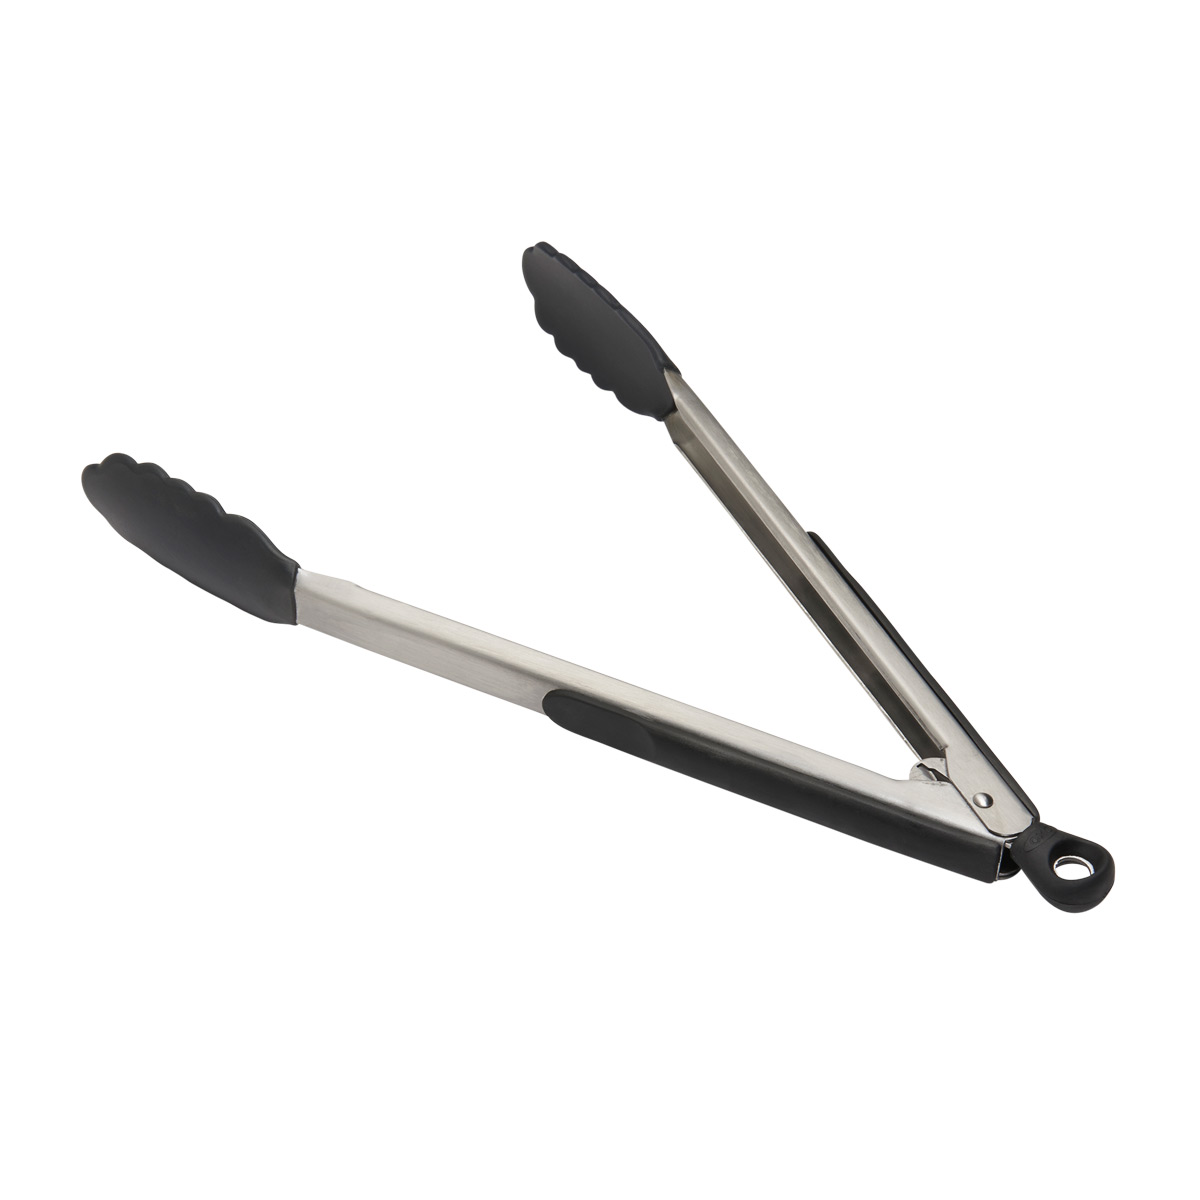 https://www.containerstore.com/catalogimages/424817/10086160-OXO-Tongs-VEN1.jpg